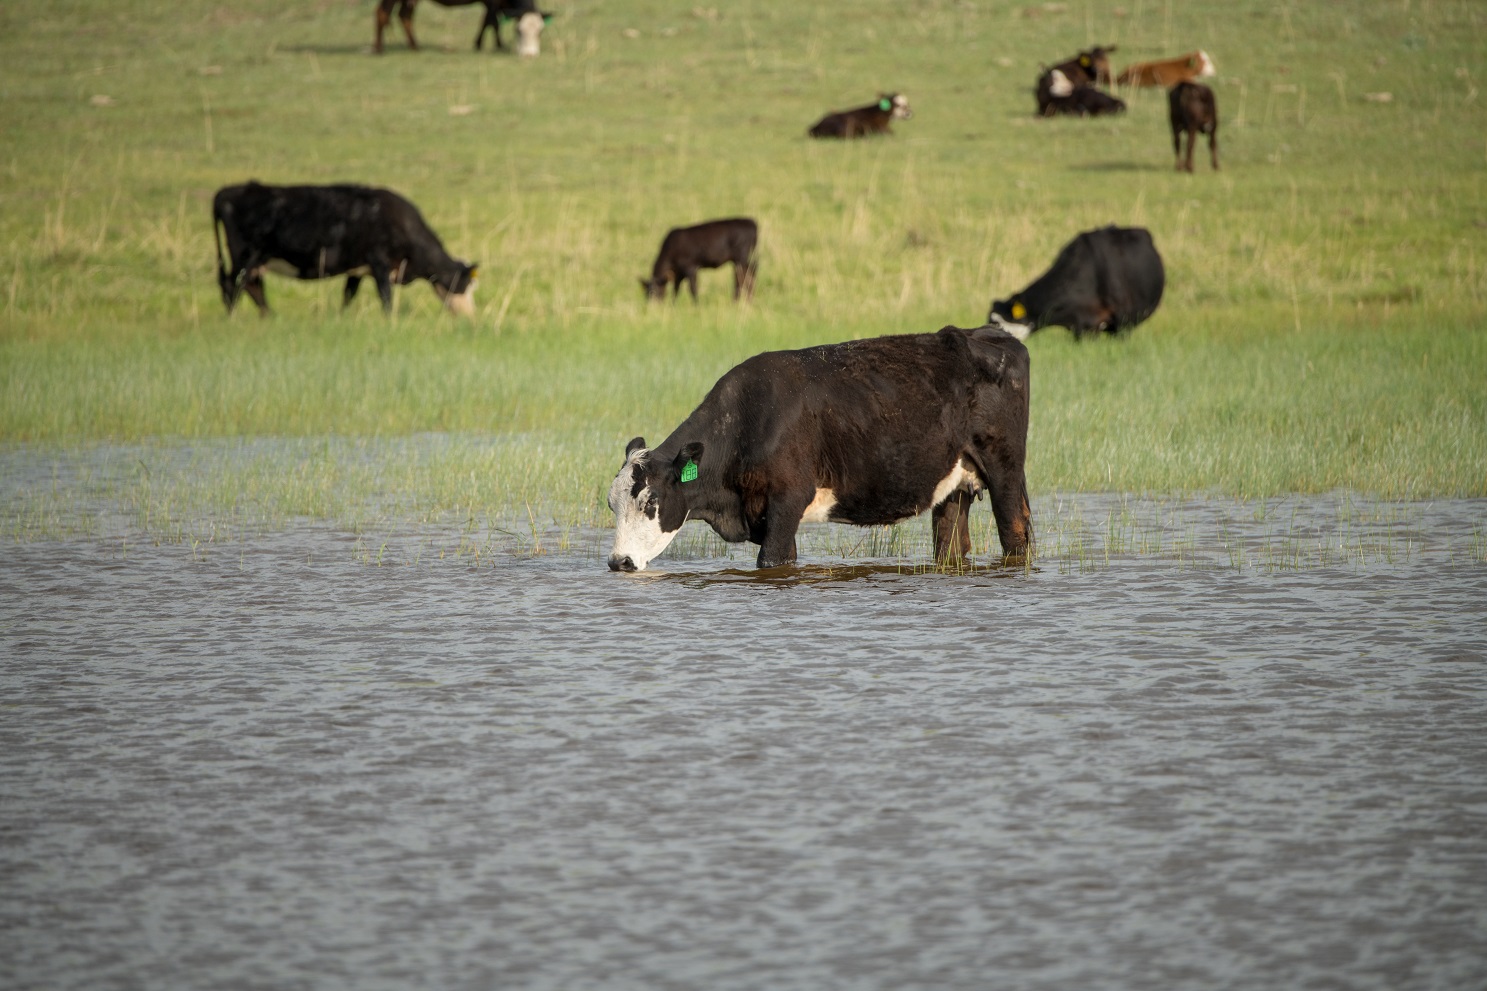 Cow drinking from lake